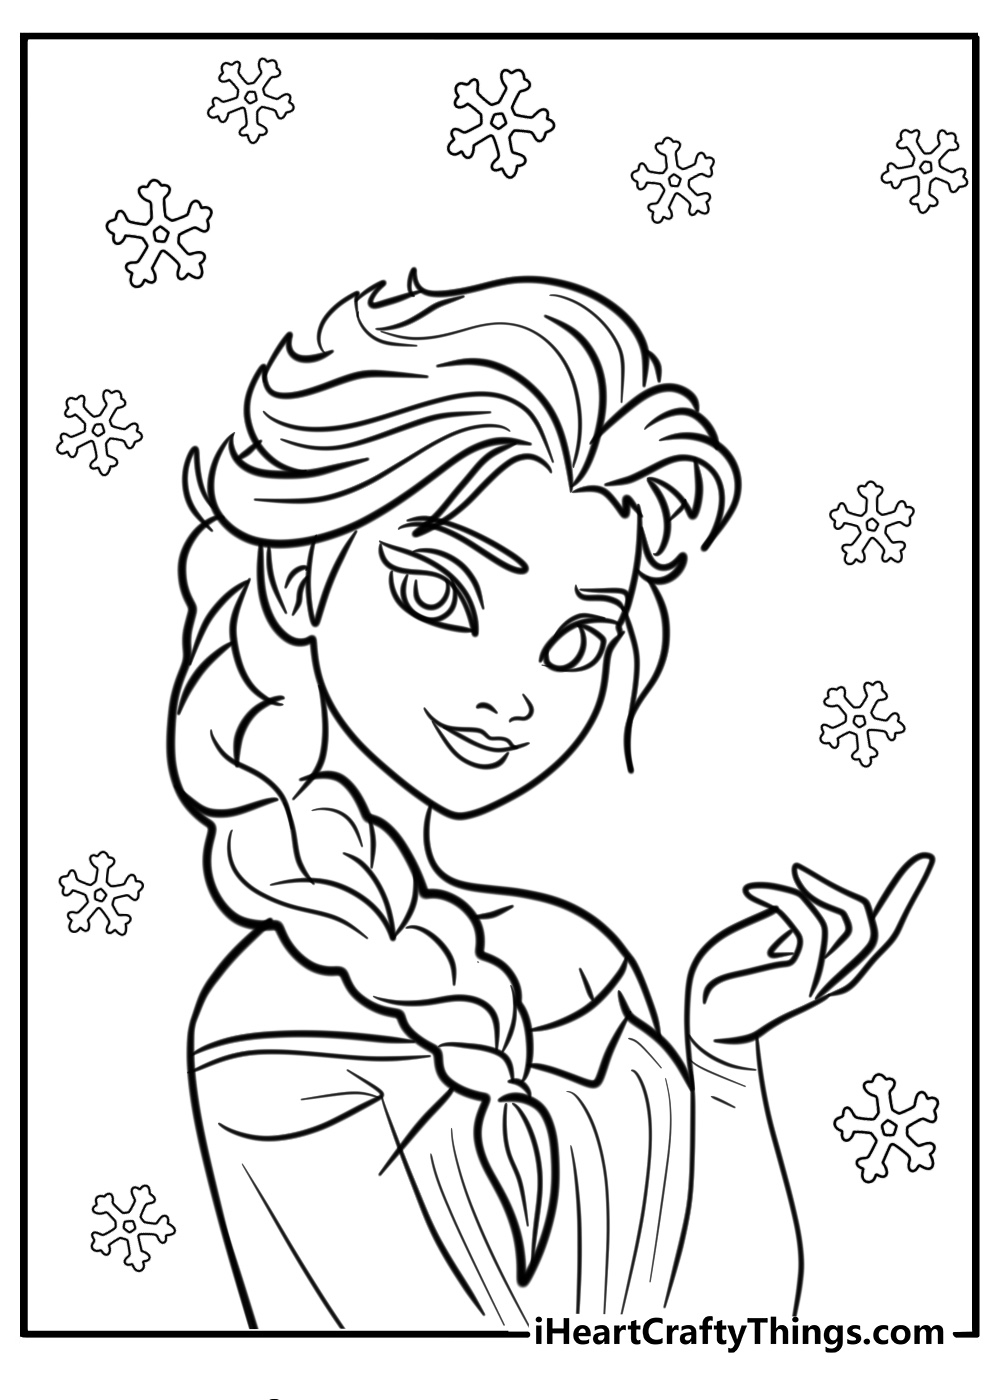 Free frozen coloring pages.